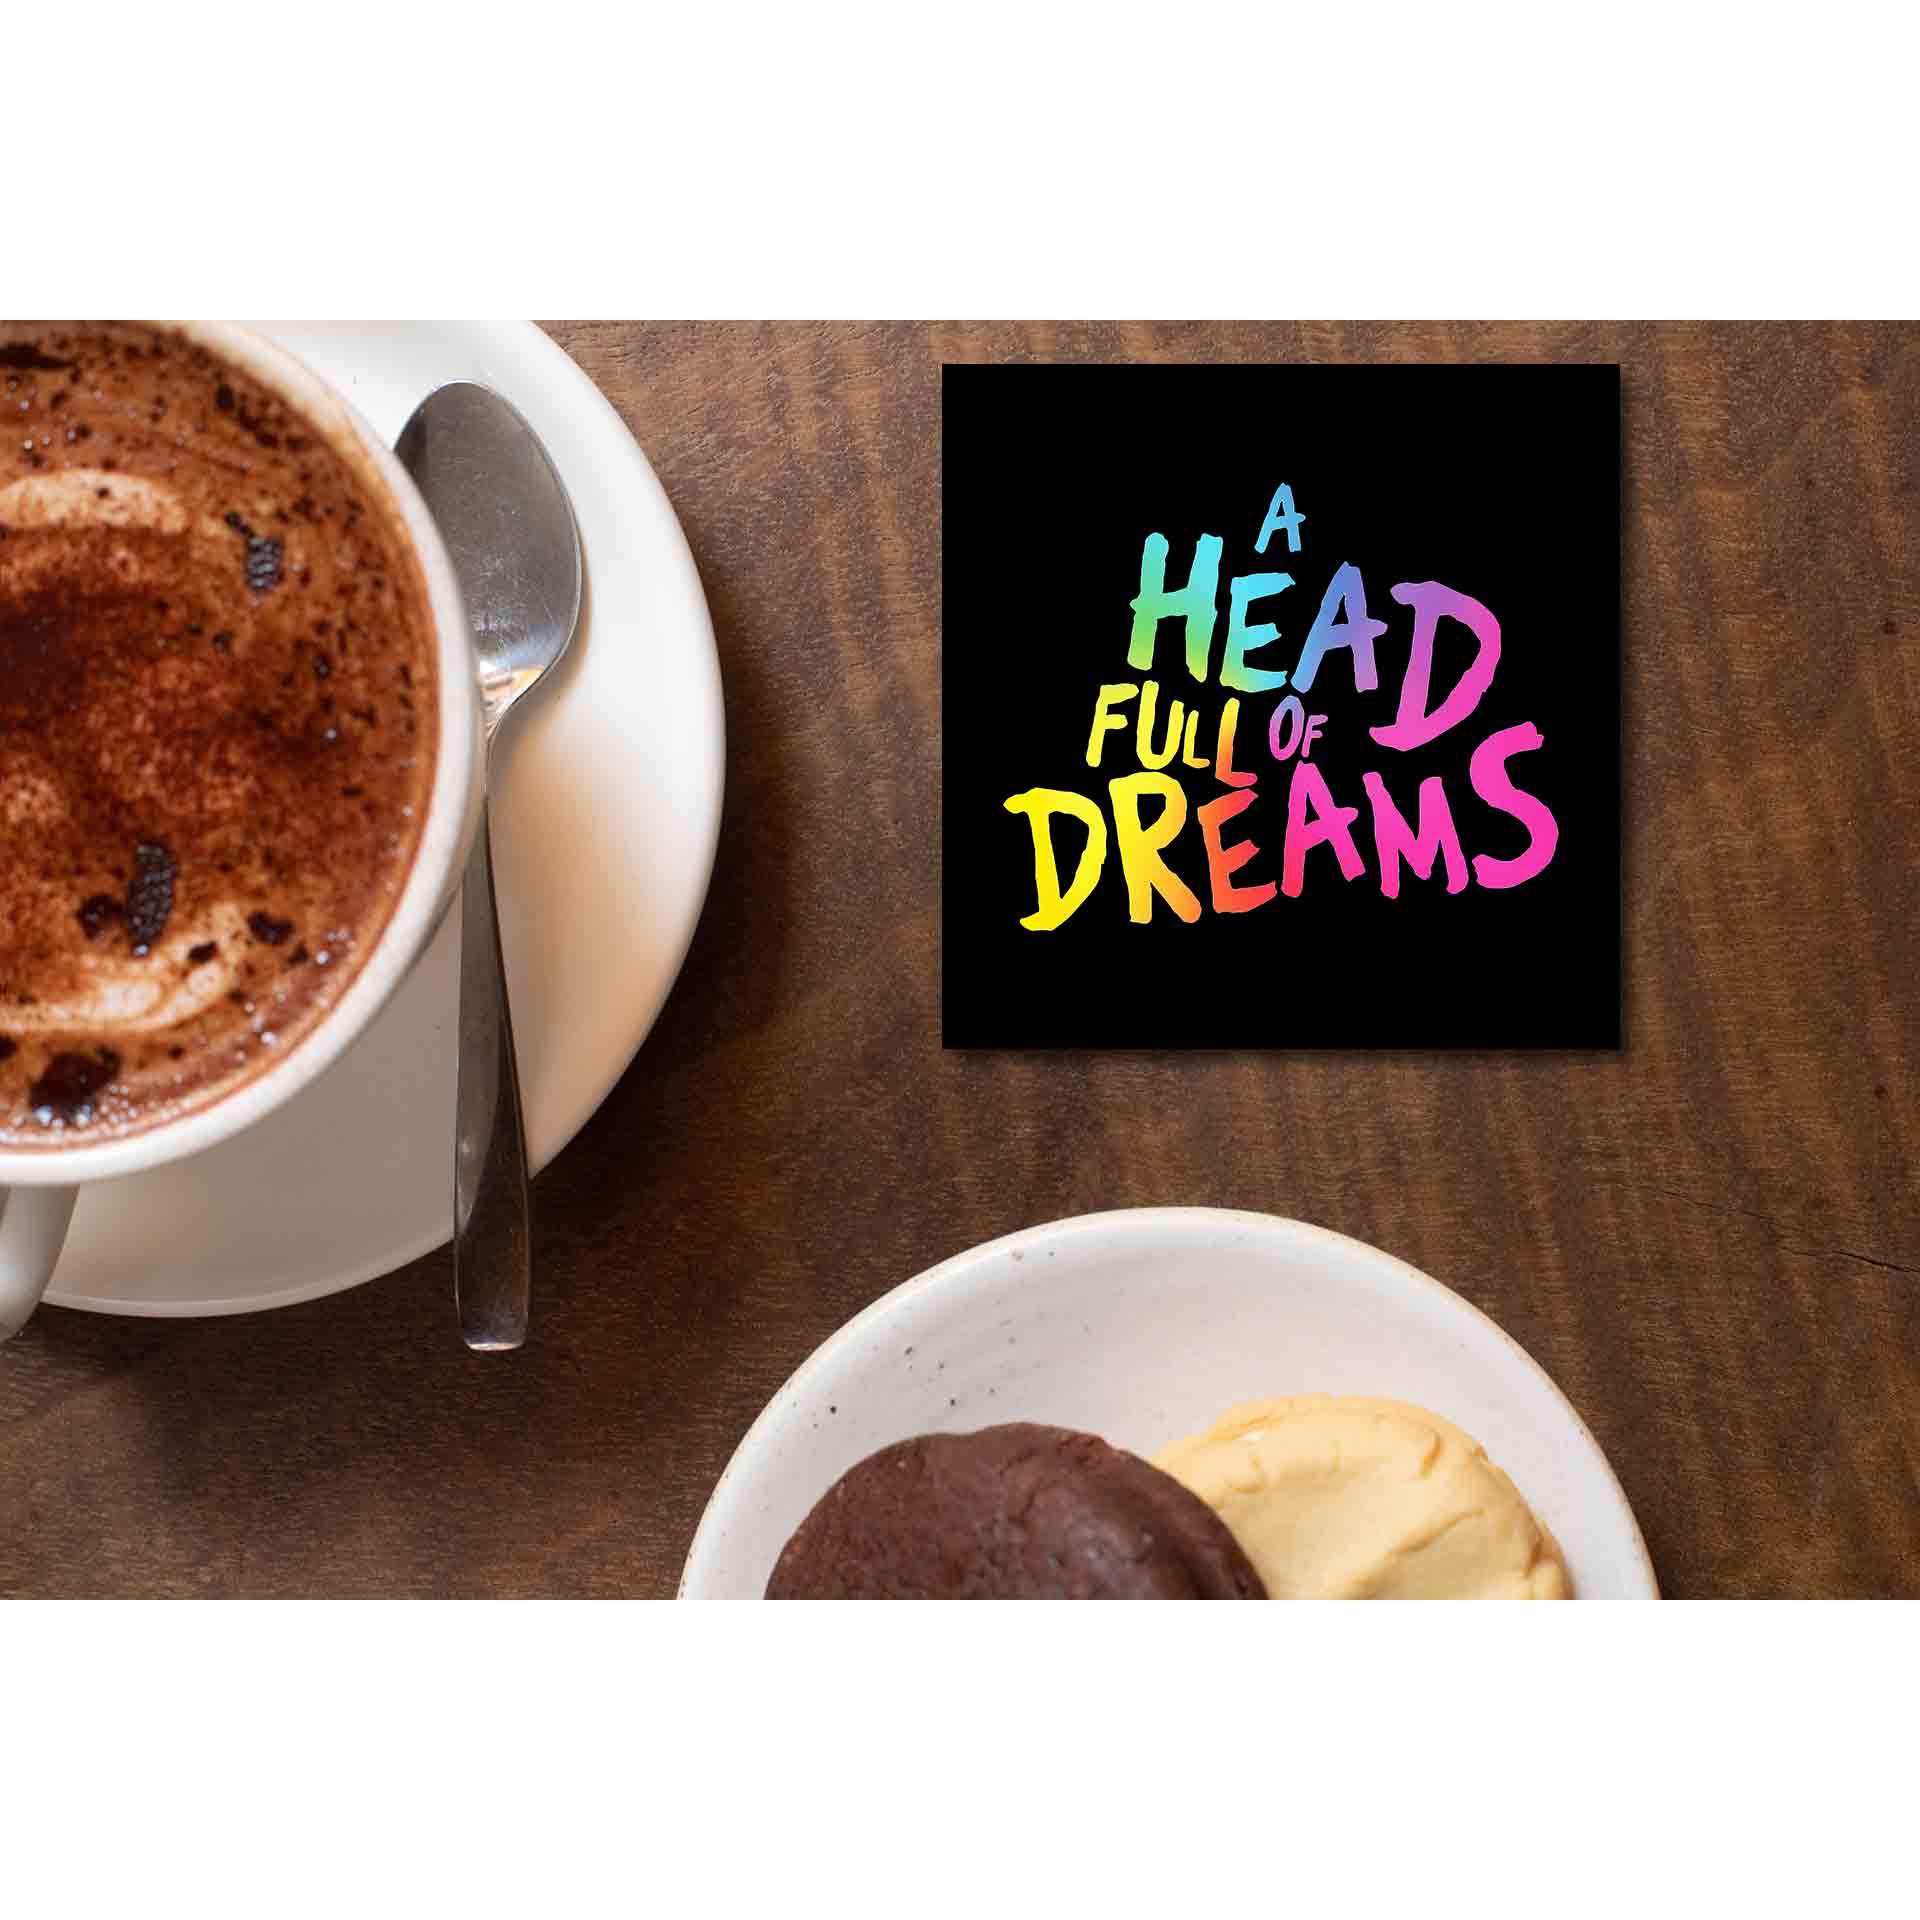 coldplay a head full of dreams coasters wooden table cups indian music band buy online india the banyan tee tbt men women girls boys unisex